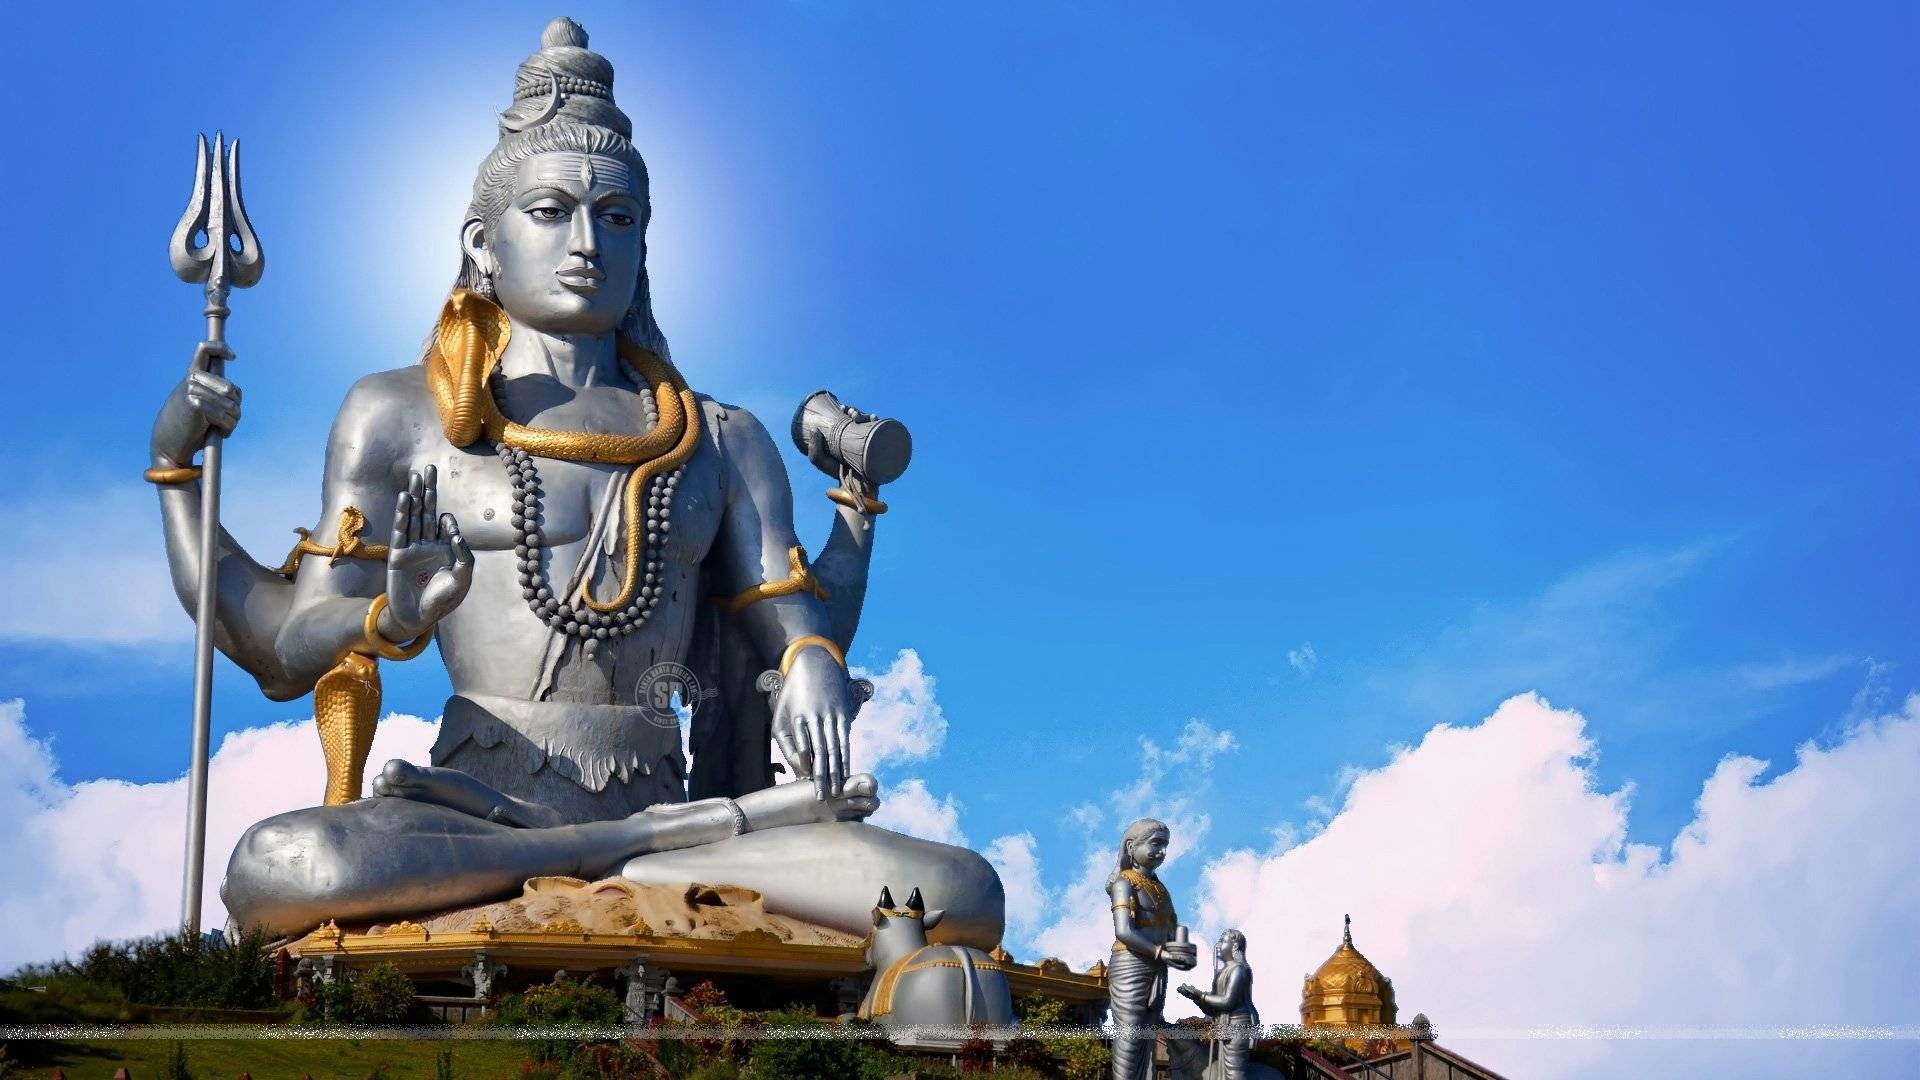 Lord Shiva Wallpapers High Resolution (73+ images)